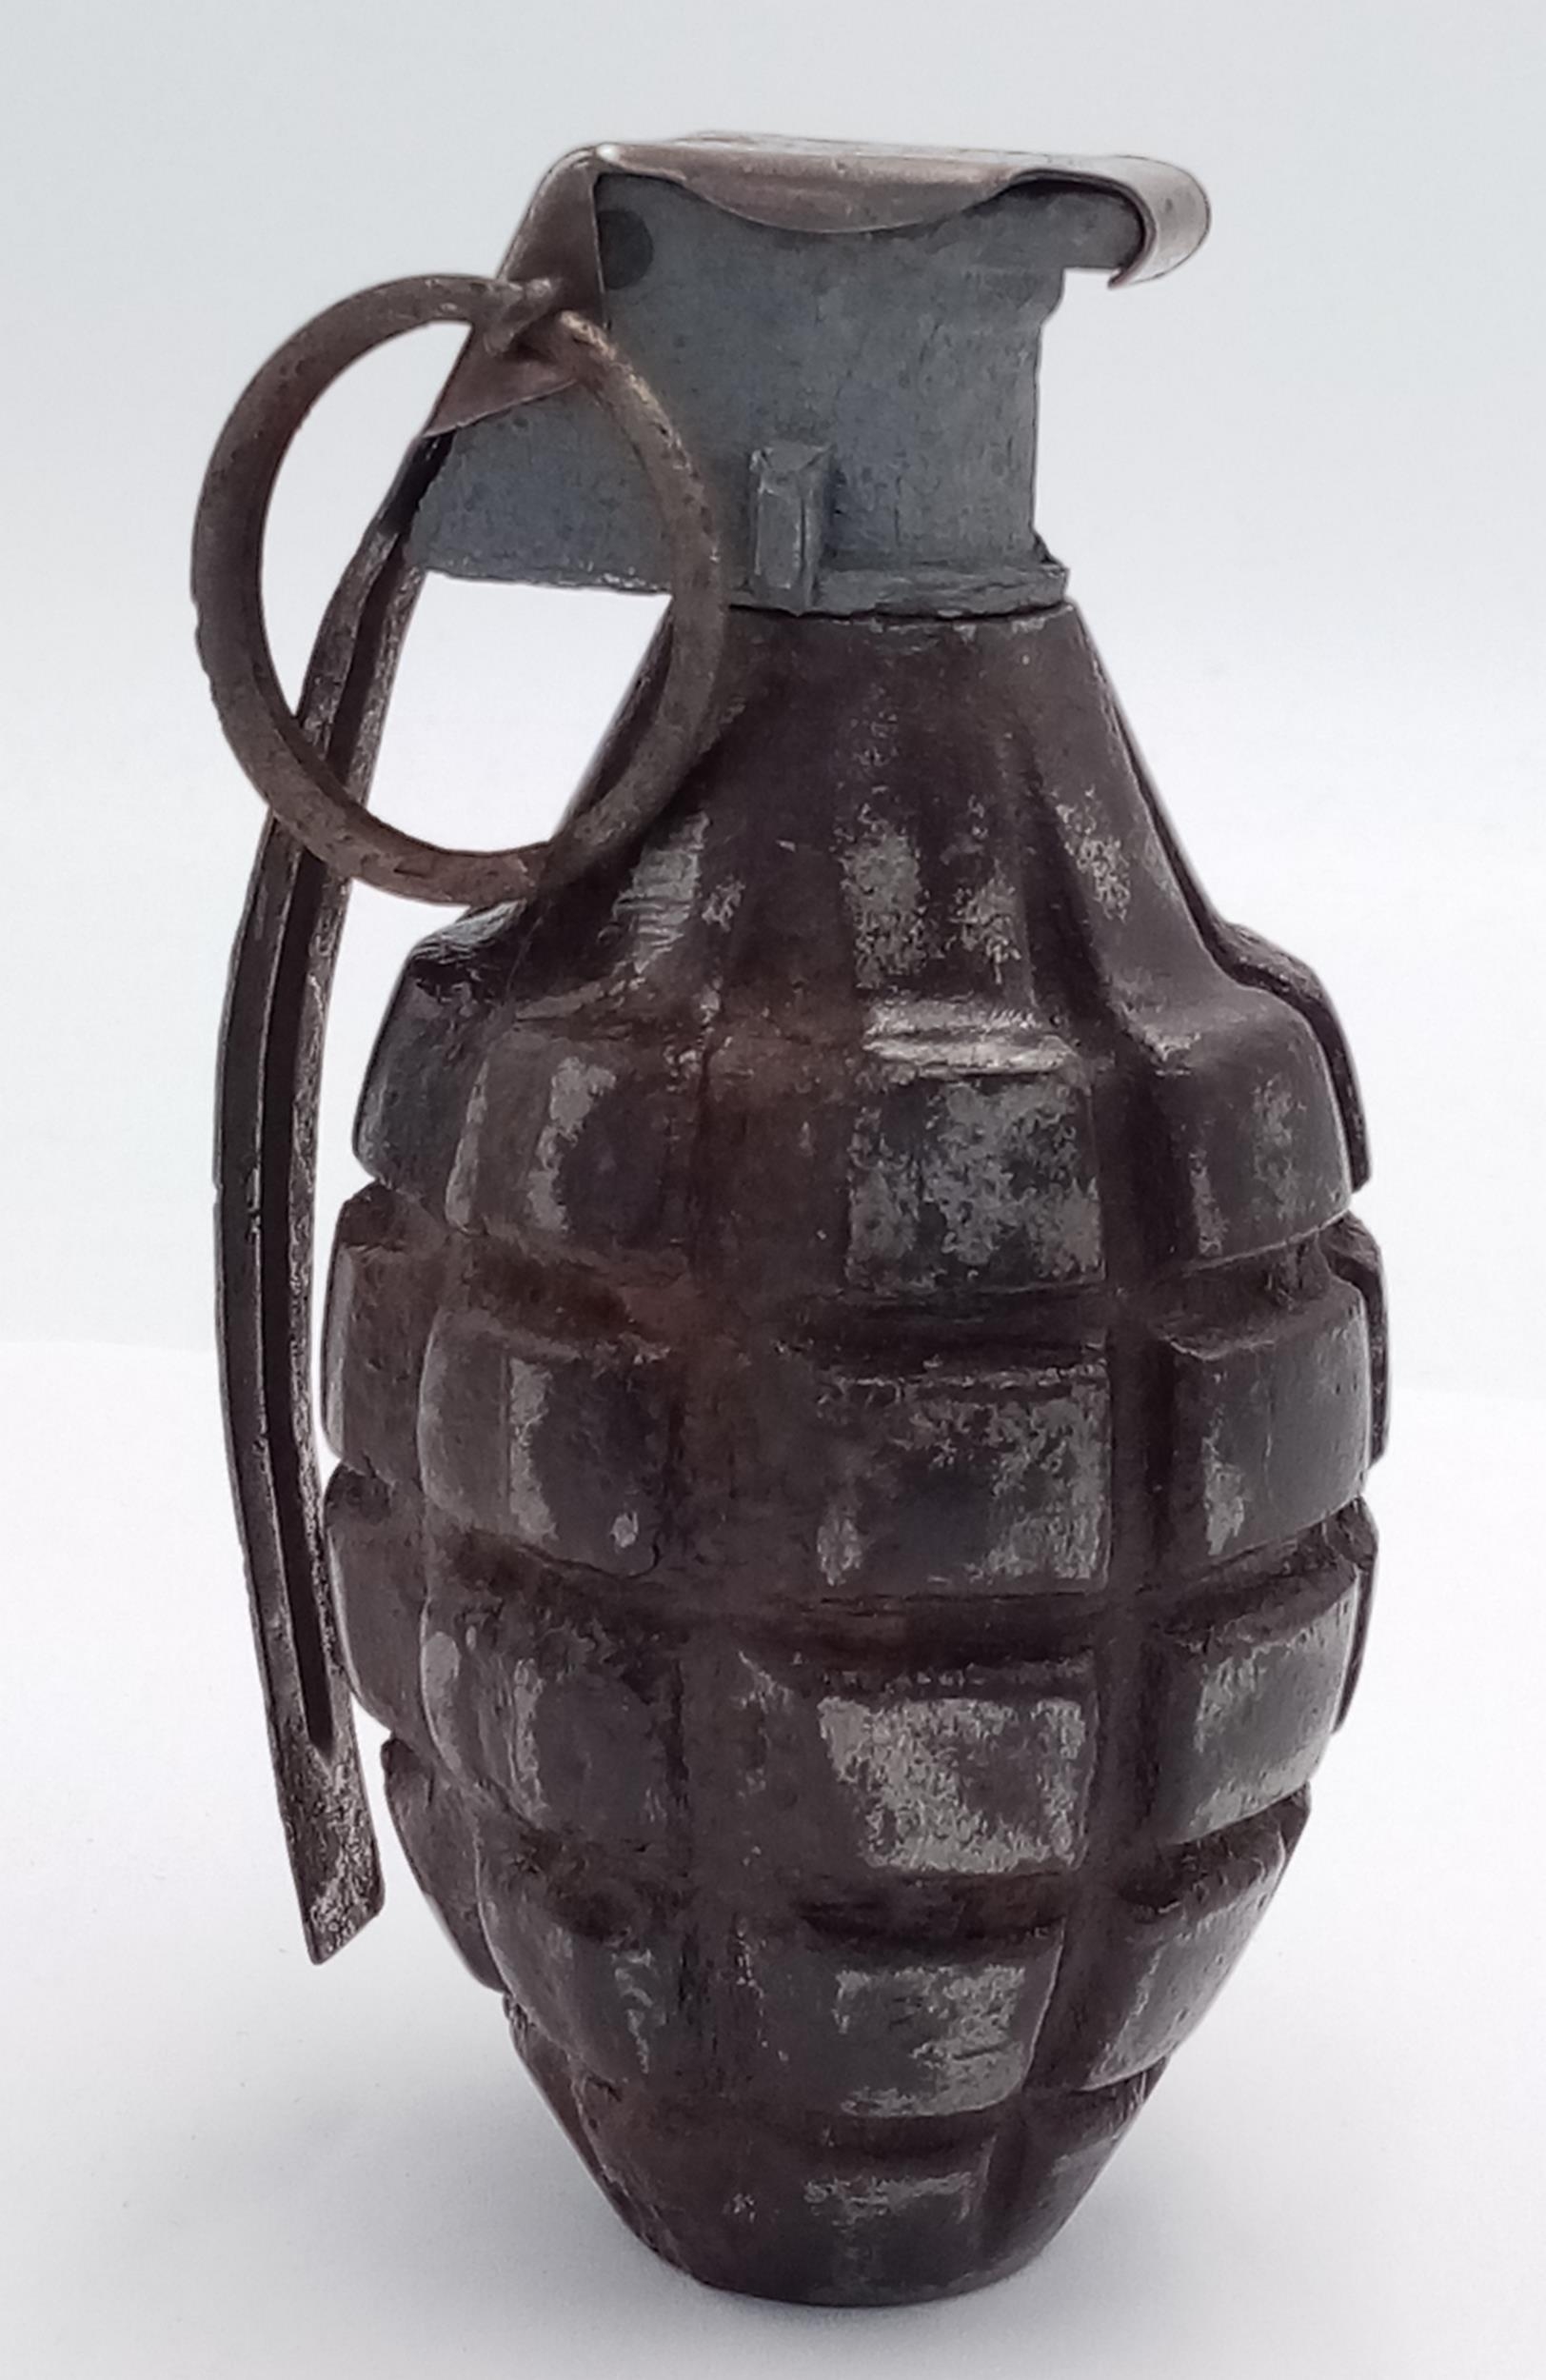 INERT WW2 Normandy Relic US Pineapple Grenade. This Grenade is one of several that were found in the